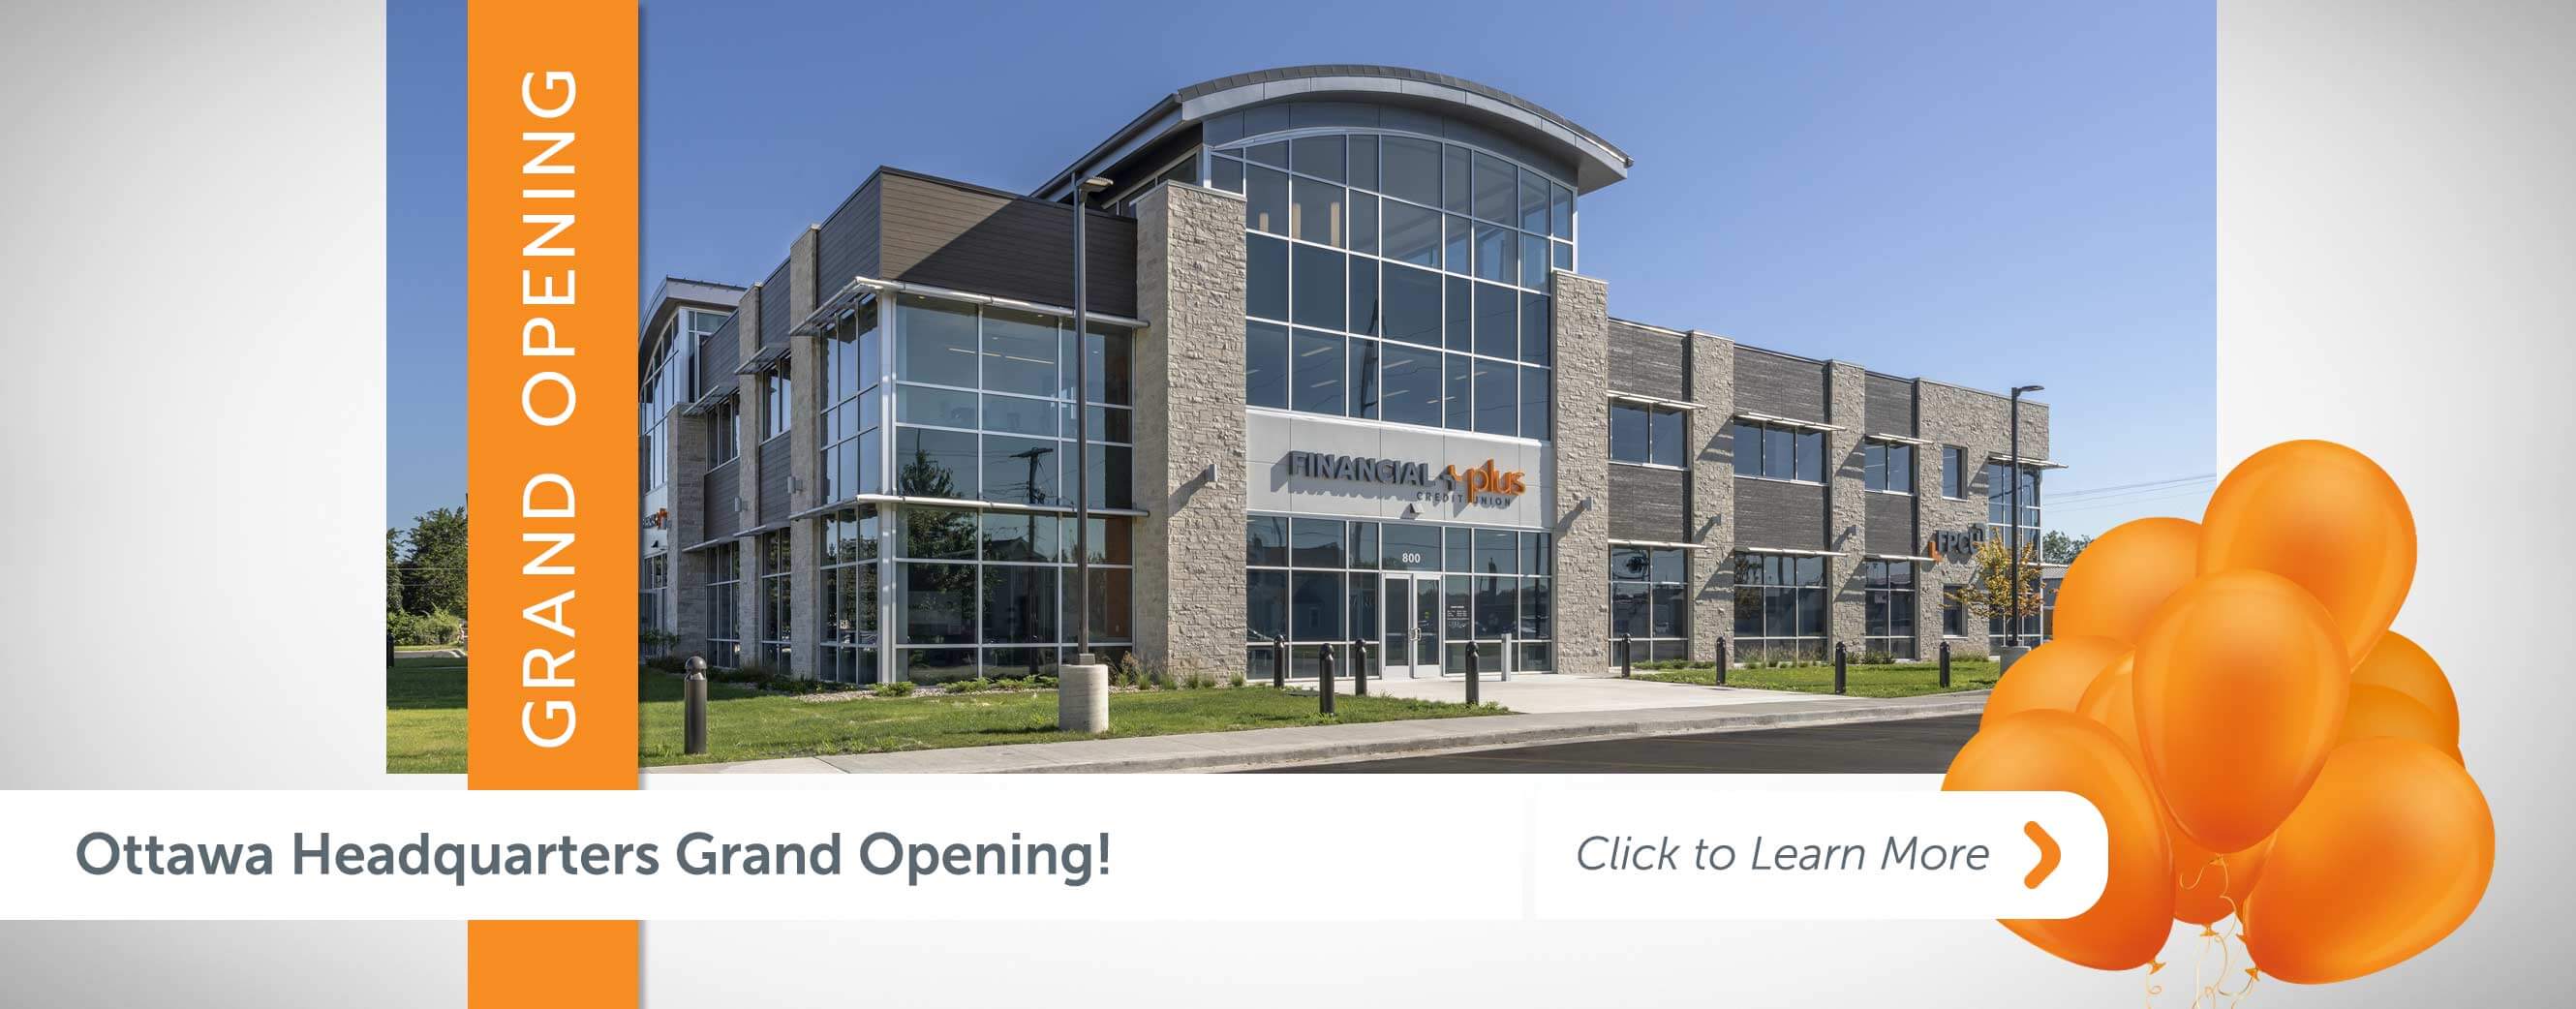 Ottawa Headquarters Grand Opening! Click to learn more